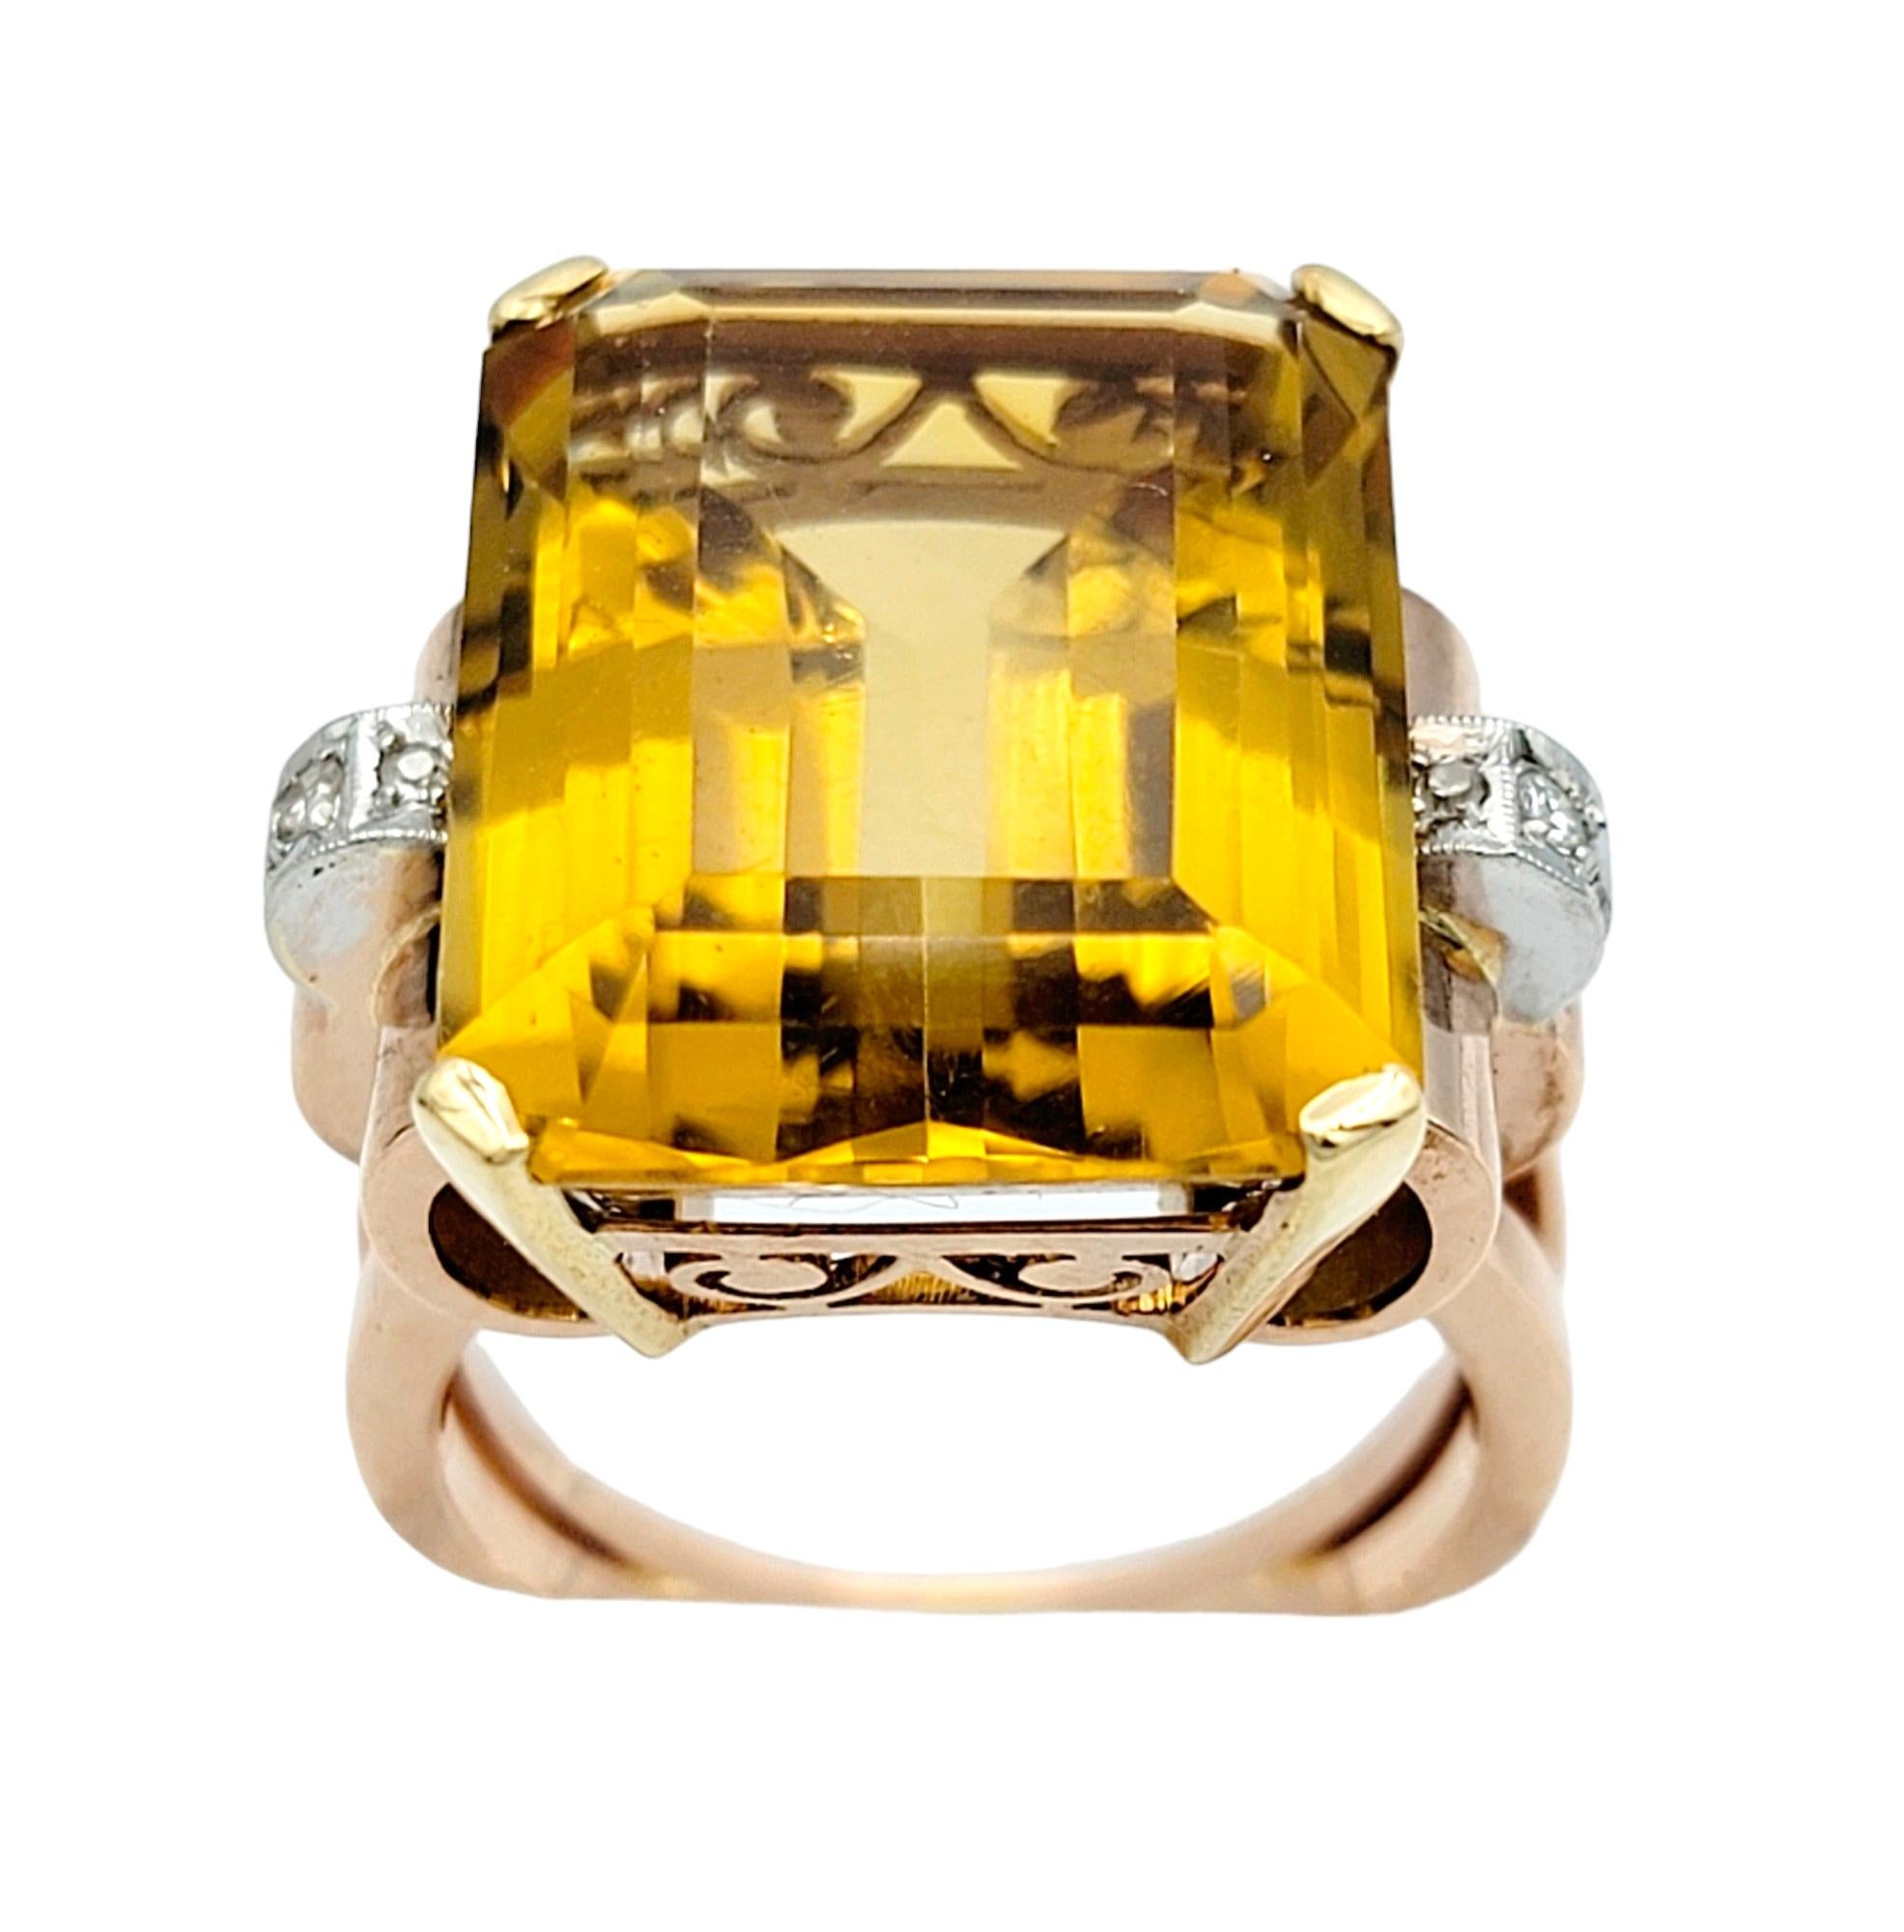 Women's 18.25 Carat Emerald Cut Citrine and Diamond Cocktail Ring in 14 Karat Rose Gold For Sale